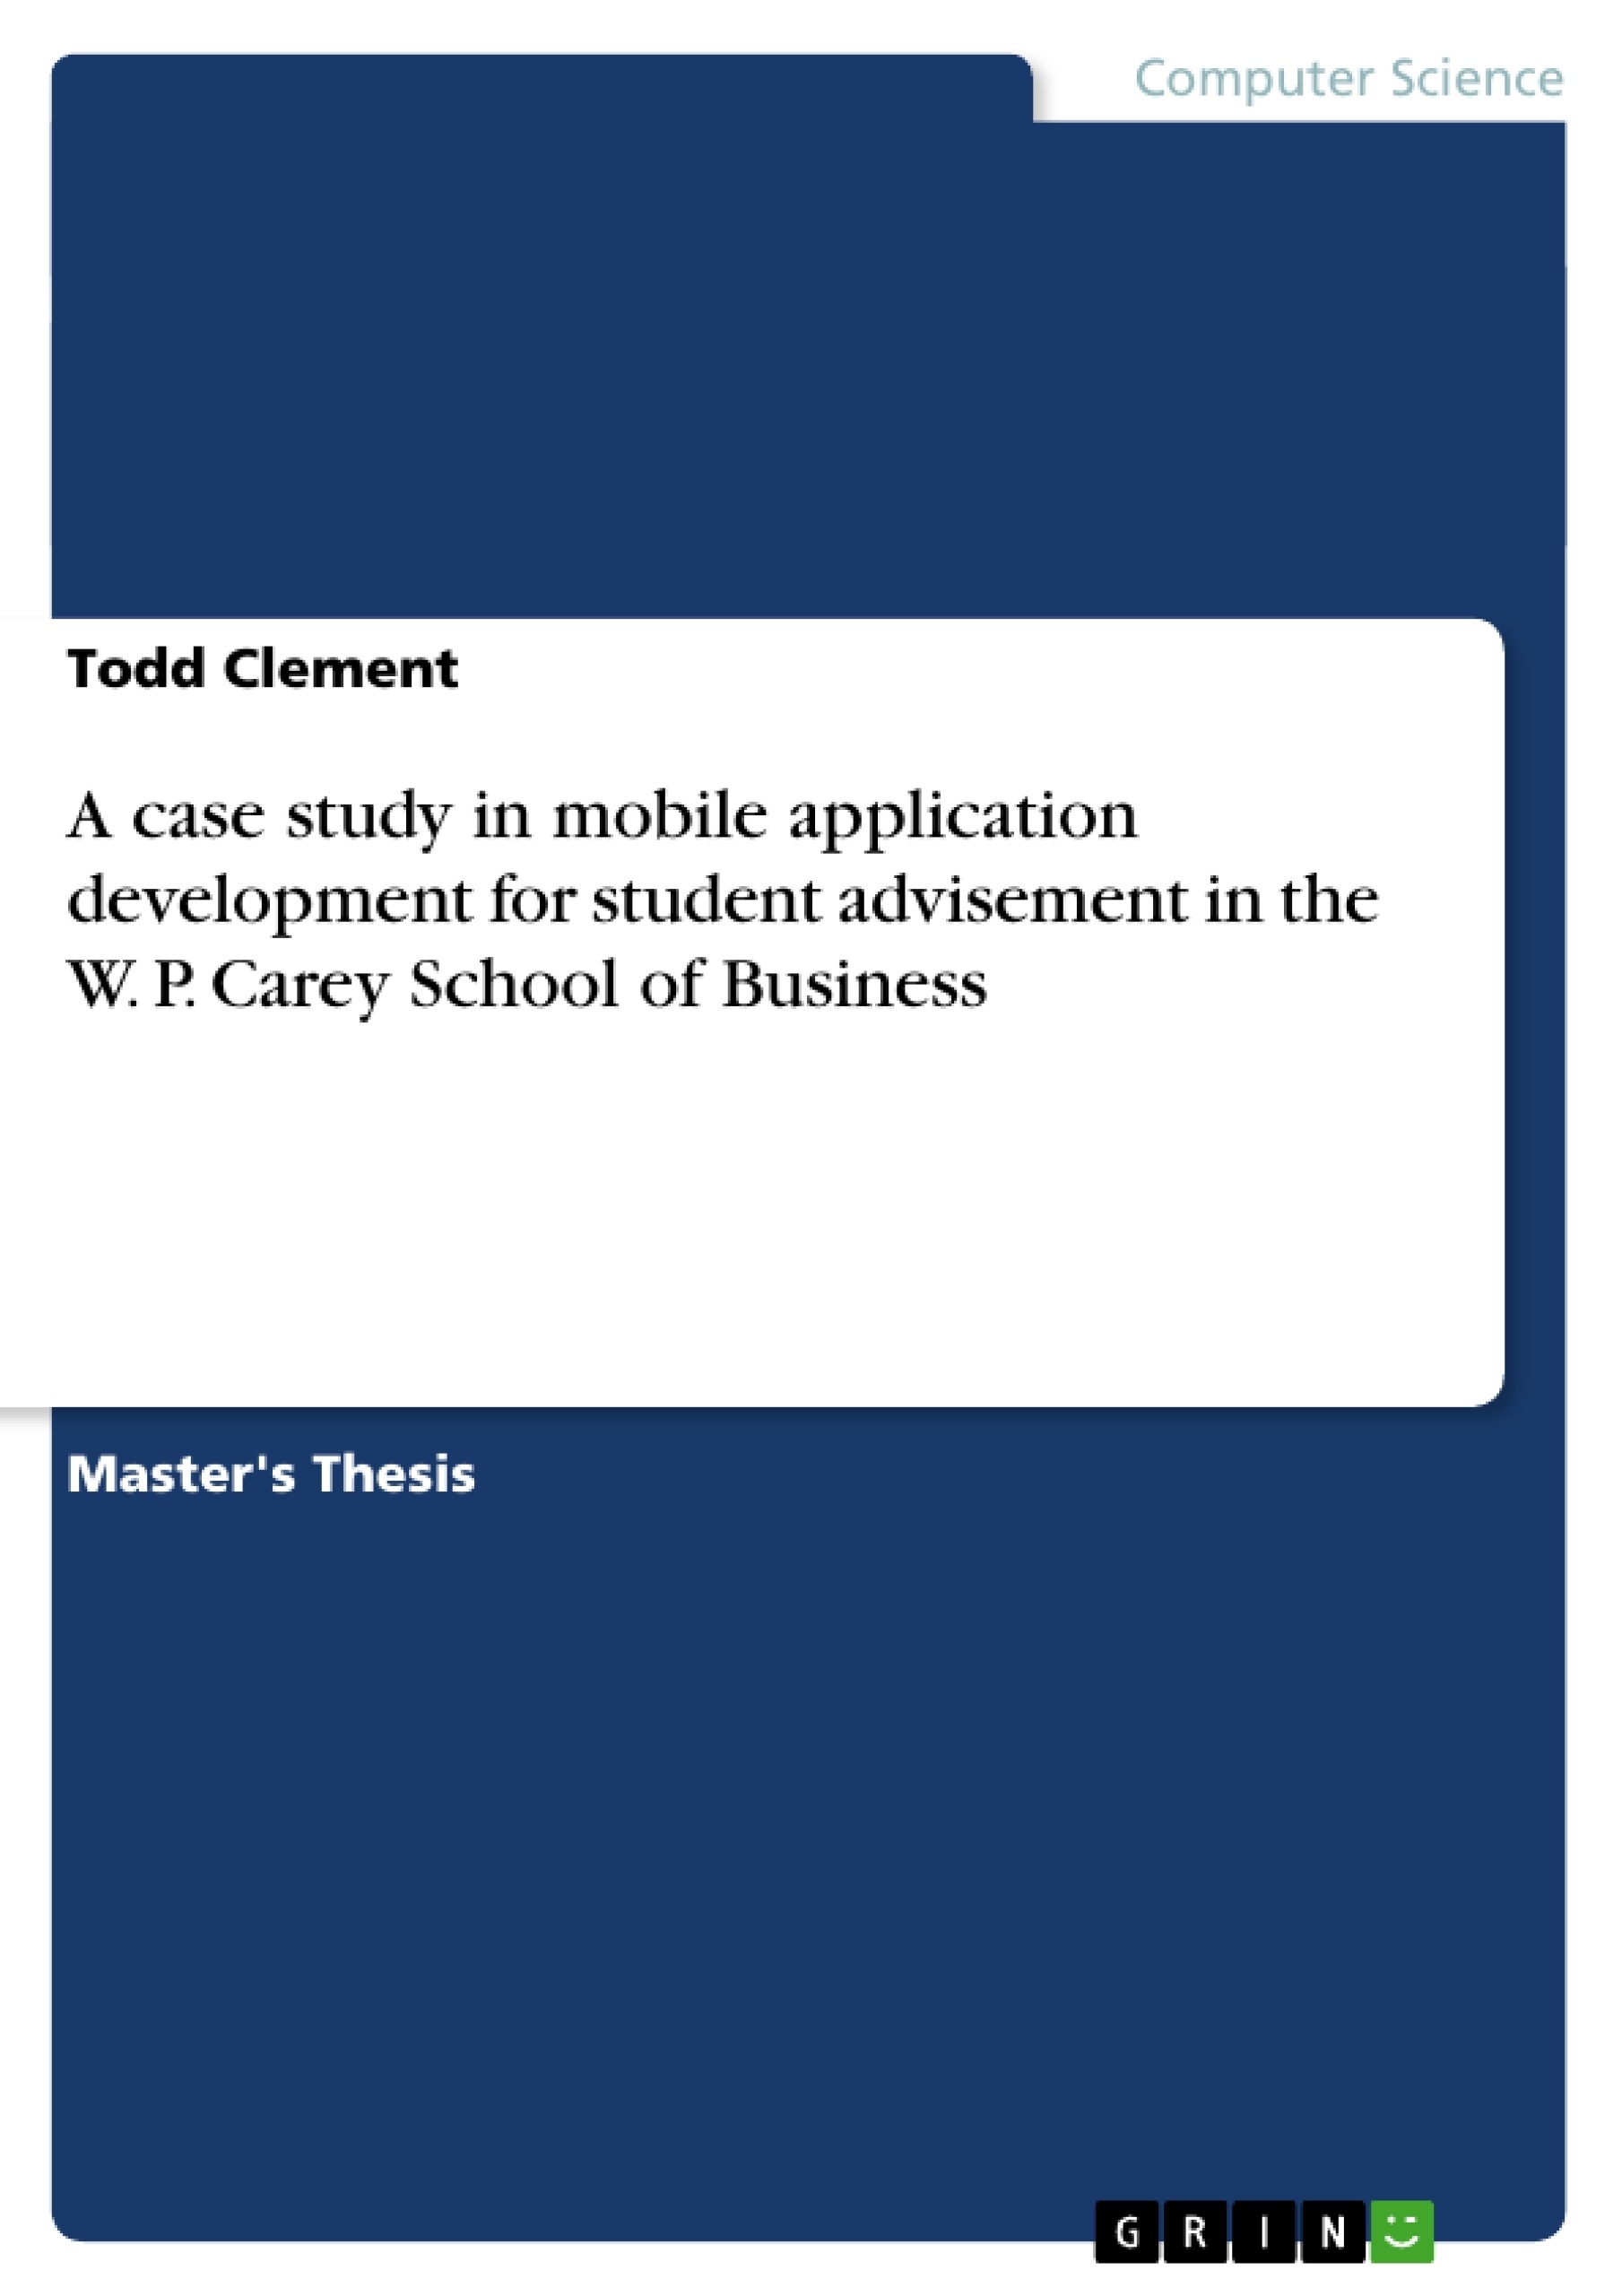 Titel: A case study in mobile application development for student advisement in the W. P. Carey School of Business